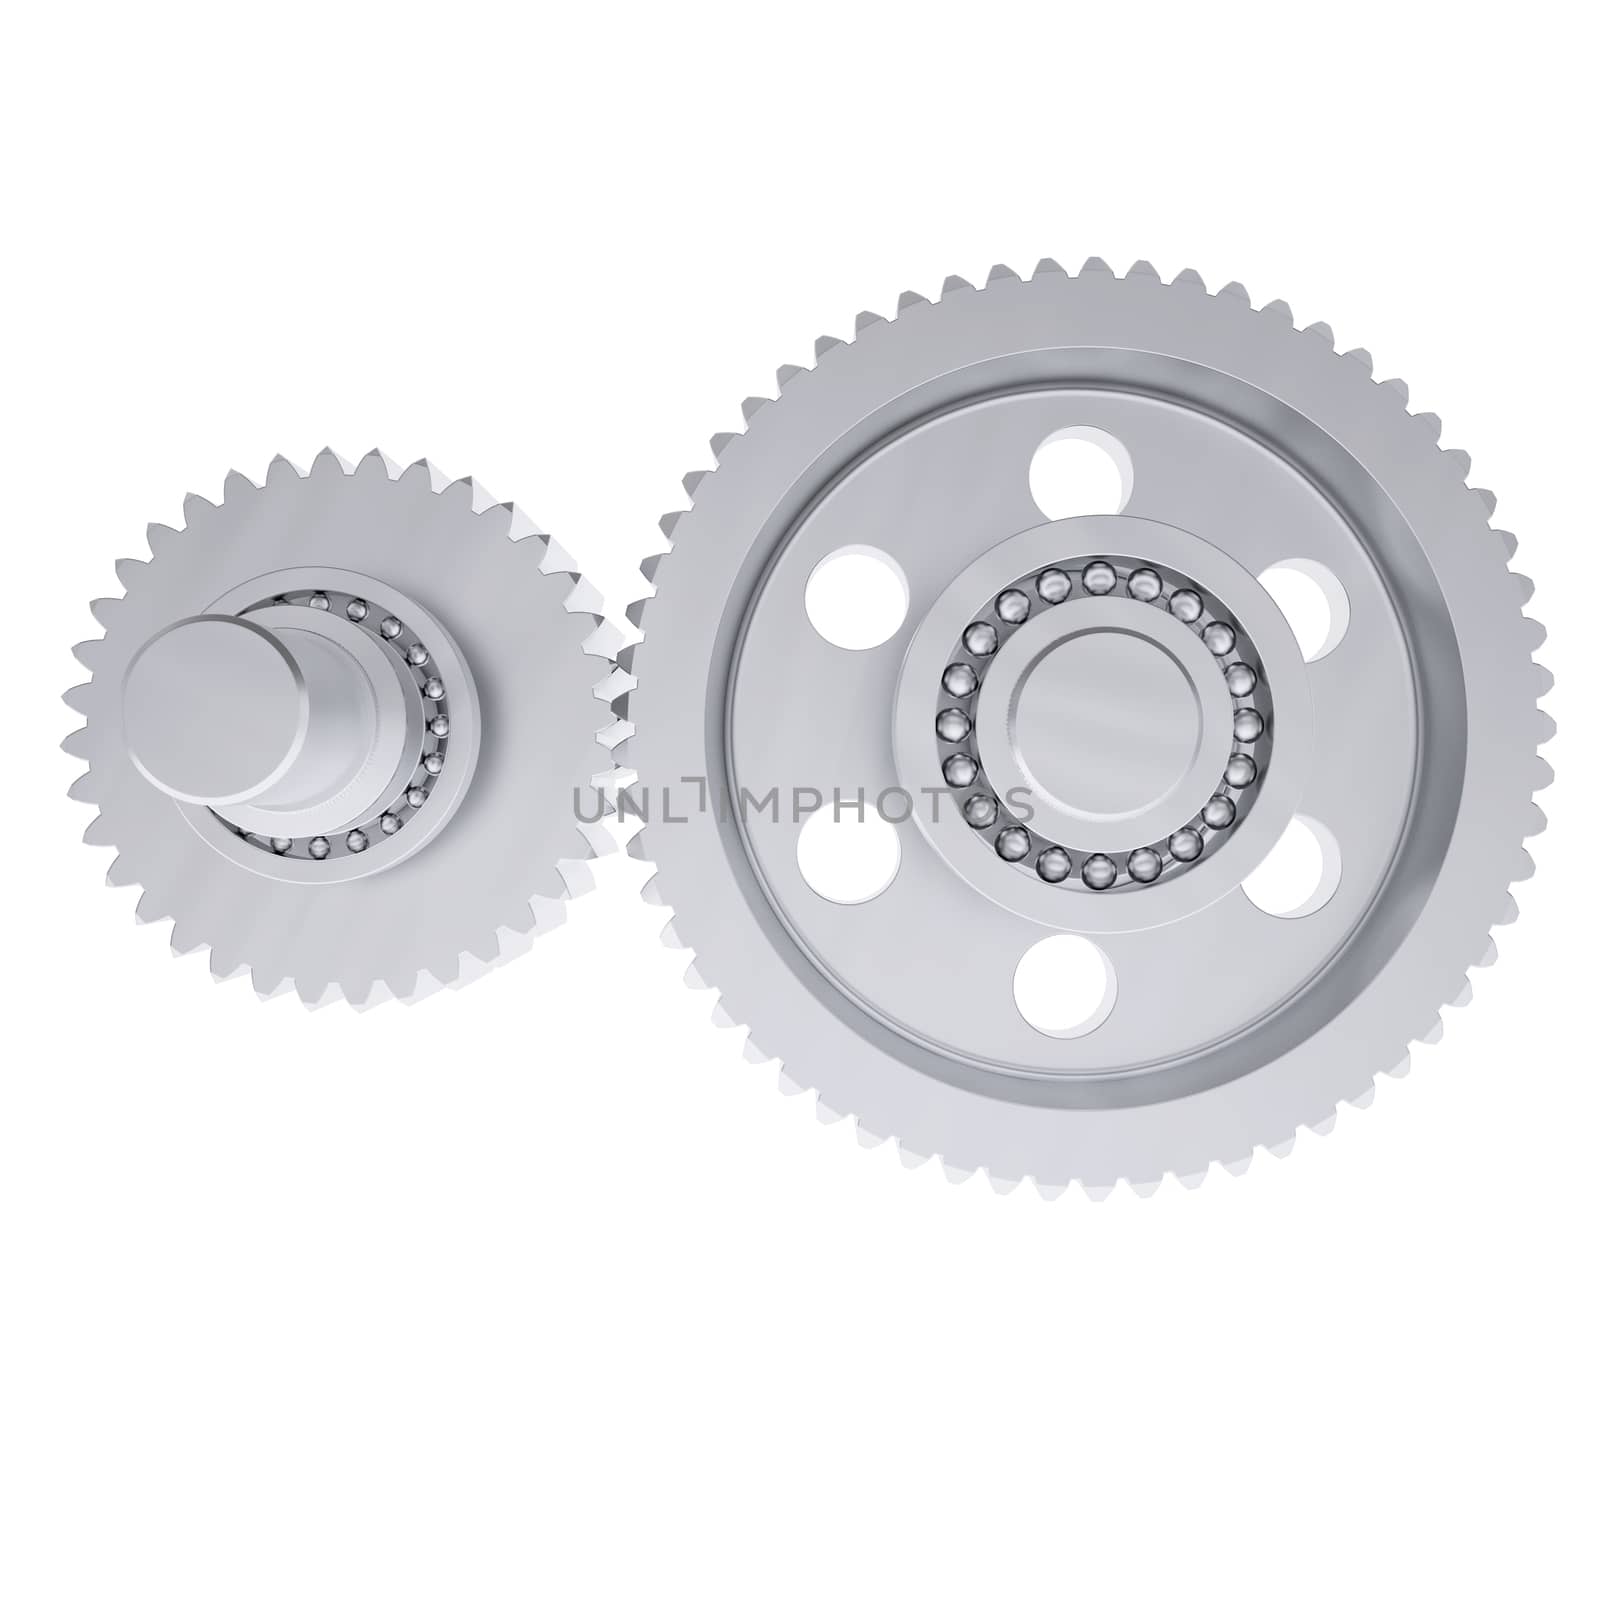 Metal shafts, gears and bearings. 3d render isolated on white background